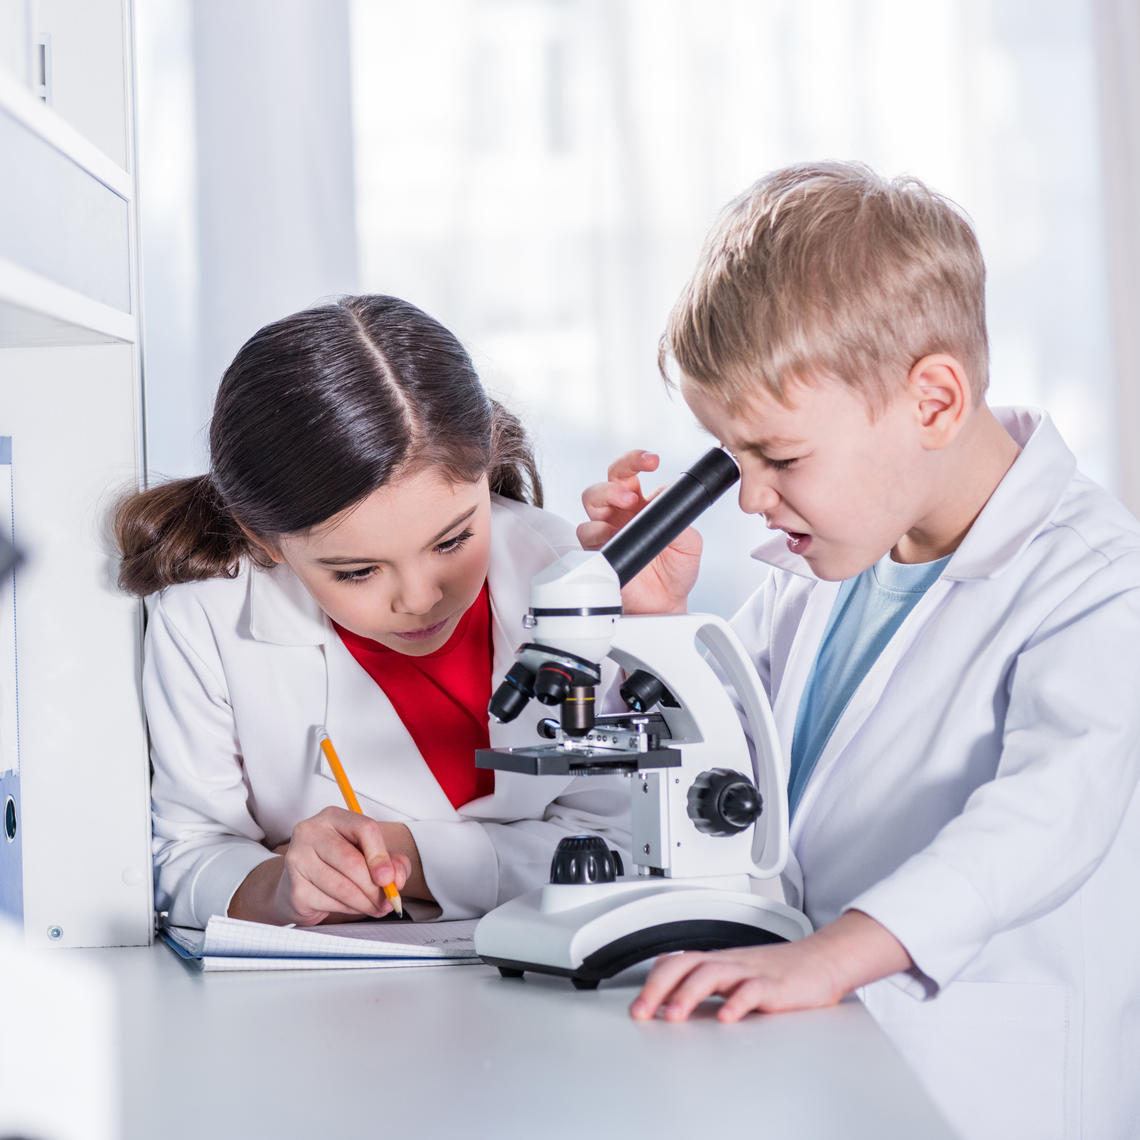 kids with microscope